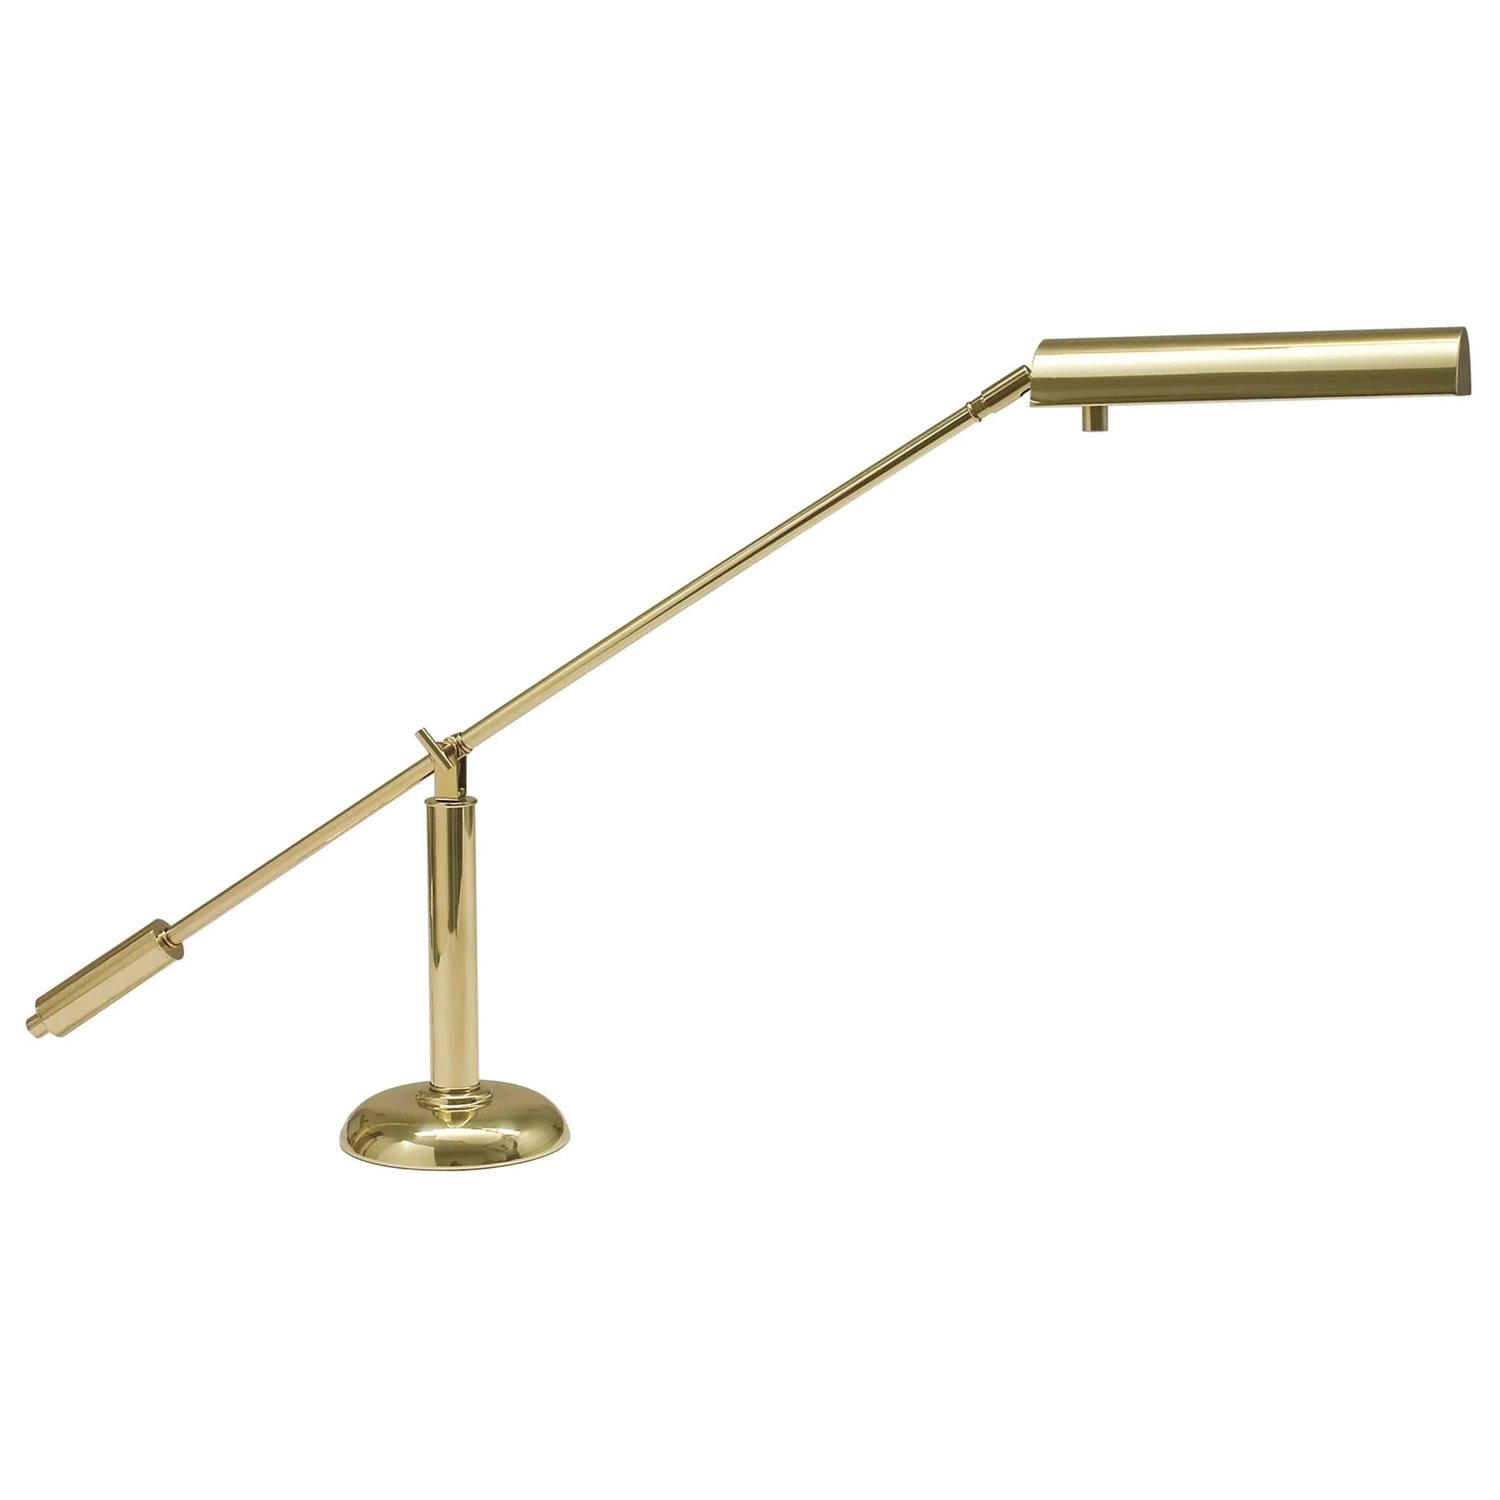 HOUSE OF TROY - ph10-195-pb - Piano Desk Lamp - Grand Piano - Polished Brass